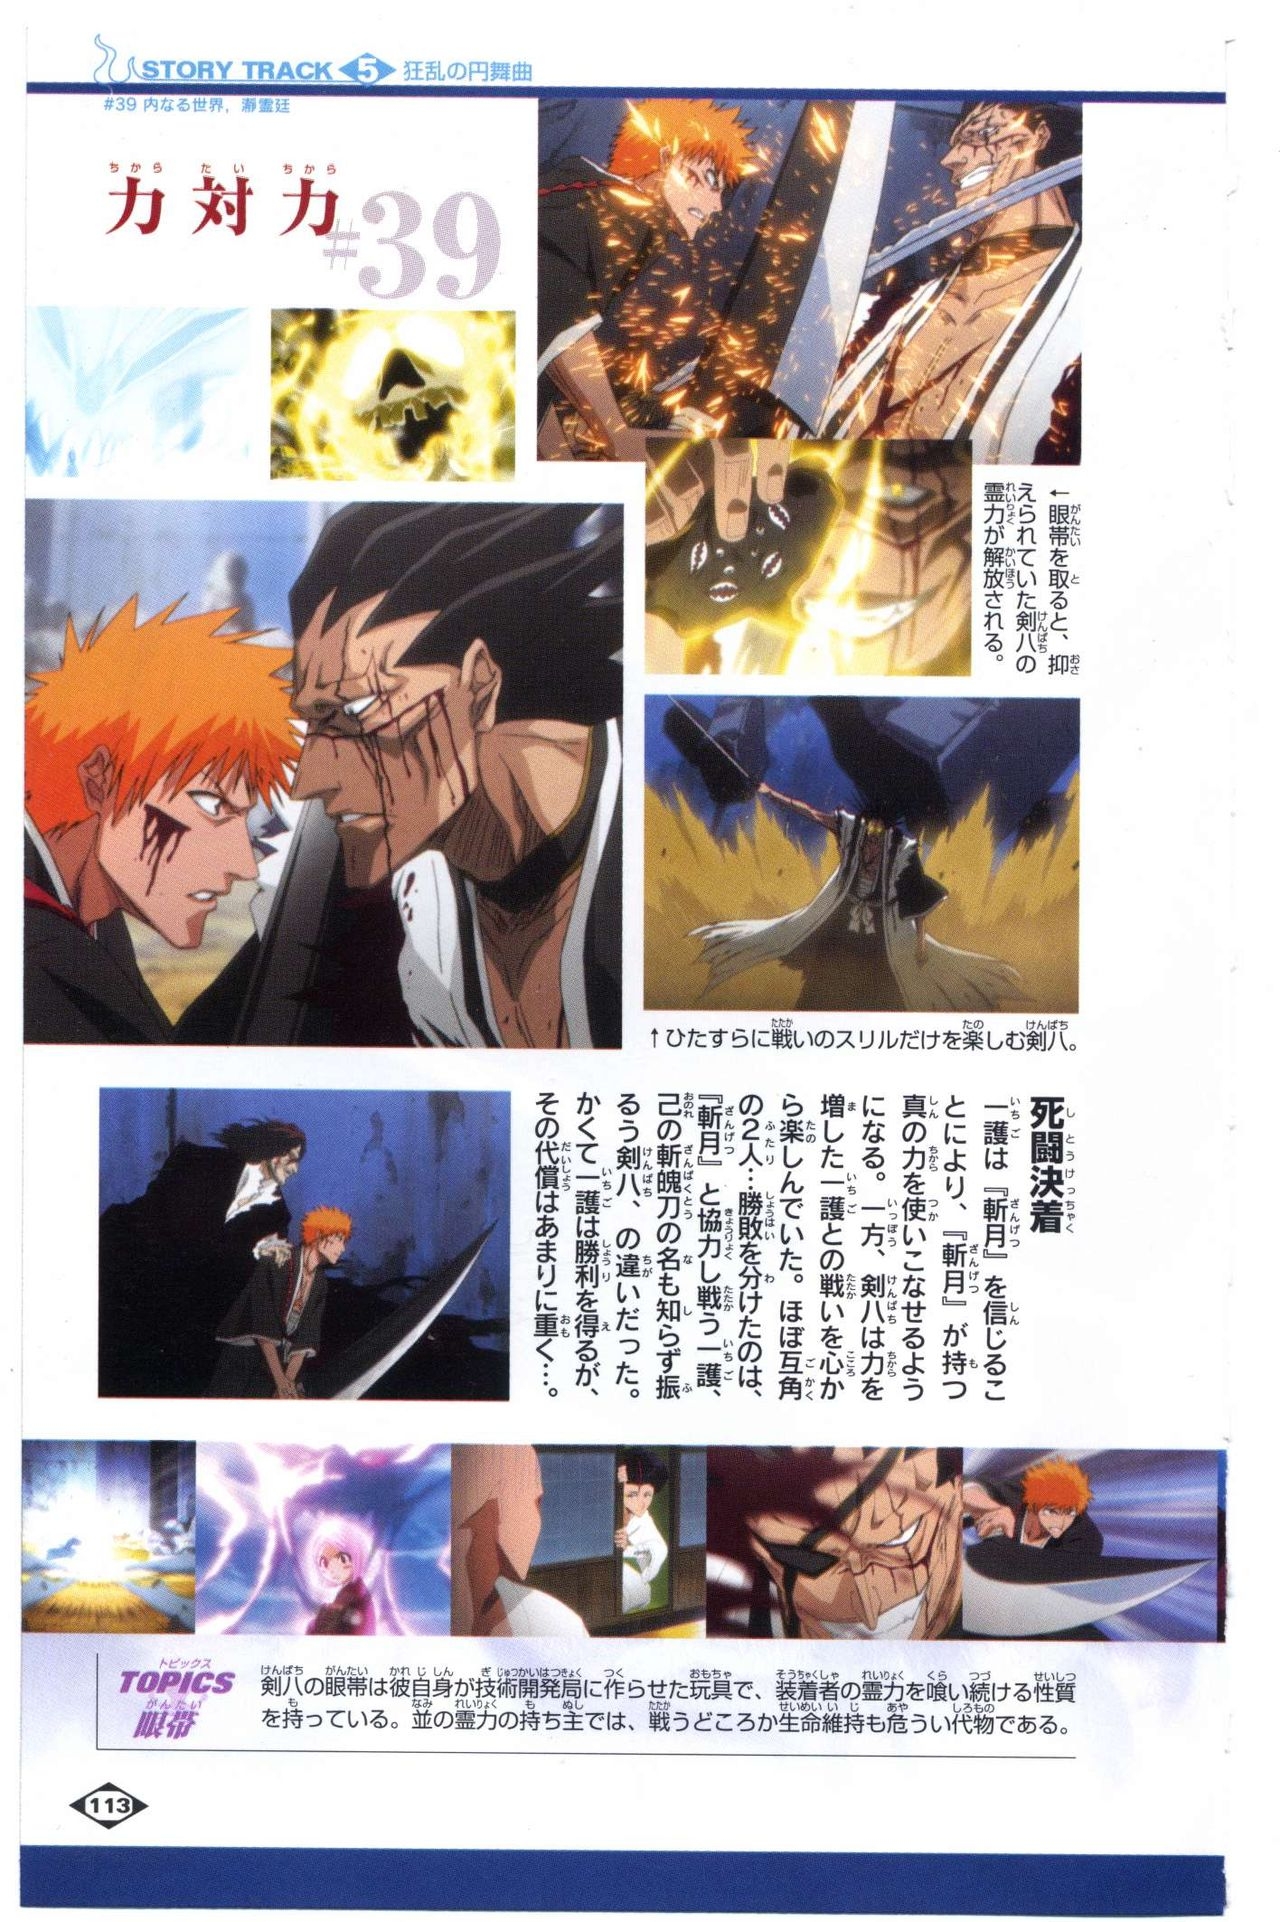 Bleach: Official Animation Book VIBEs 113